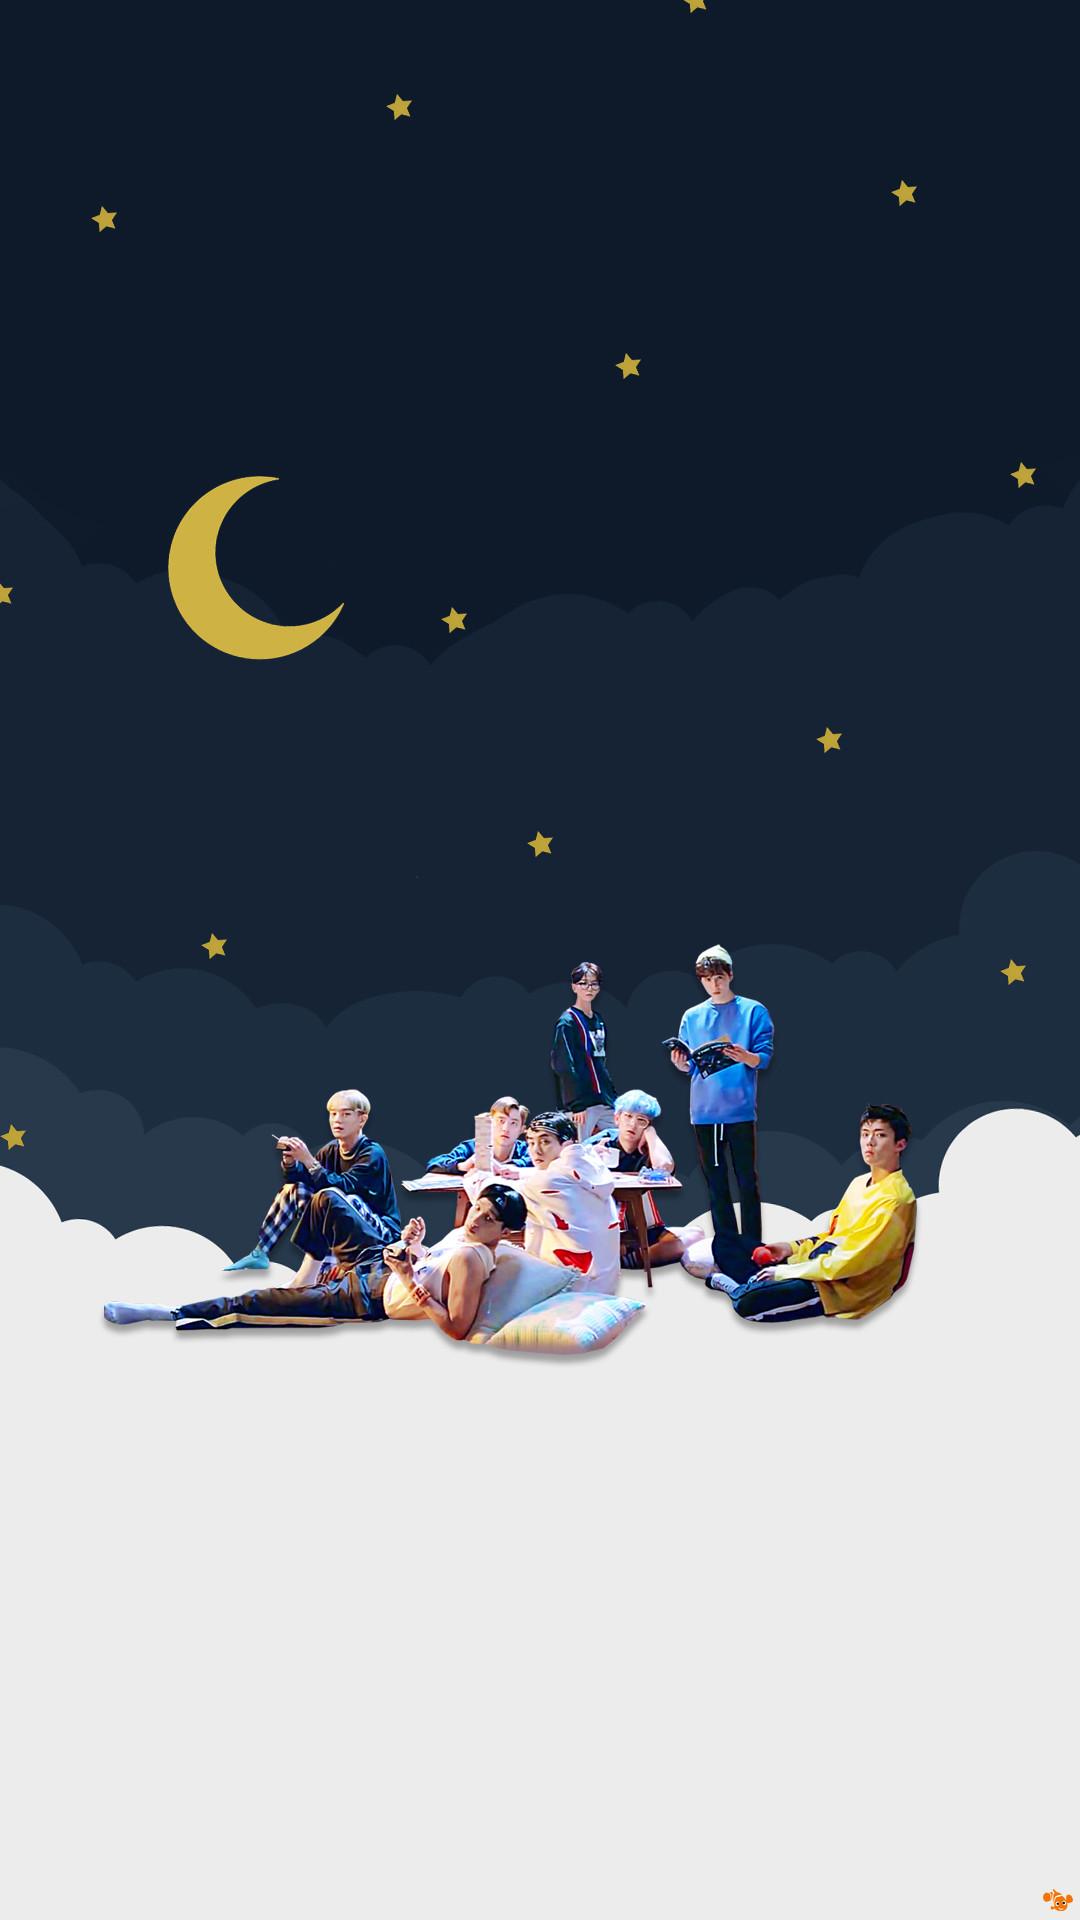 Aesthetic EXO Wallpapers - Wallpaper Cave